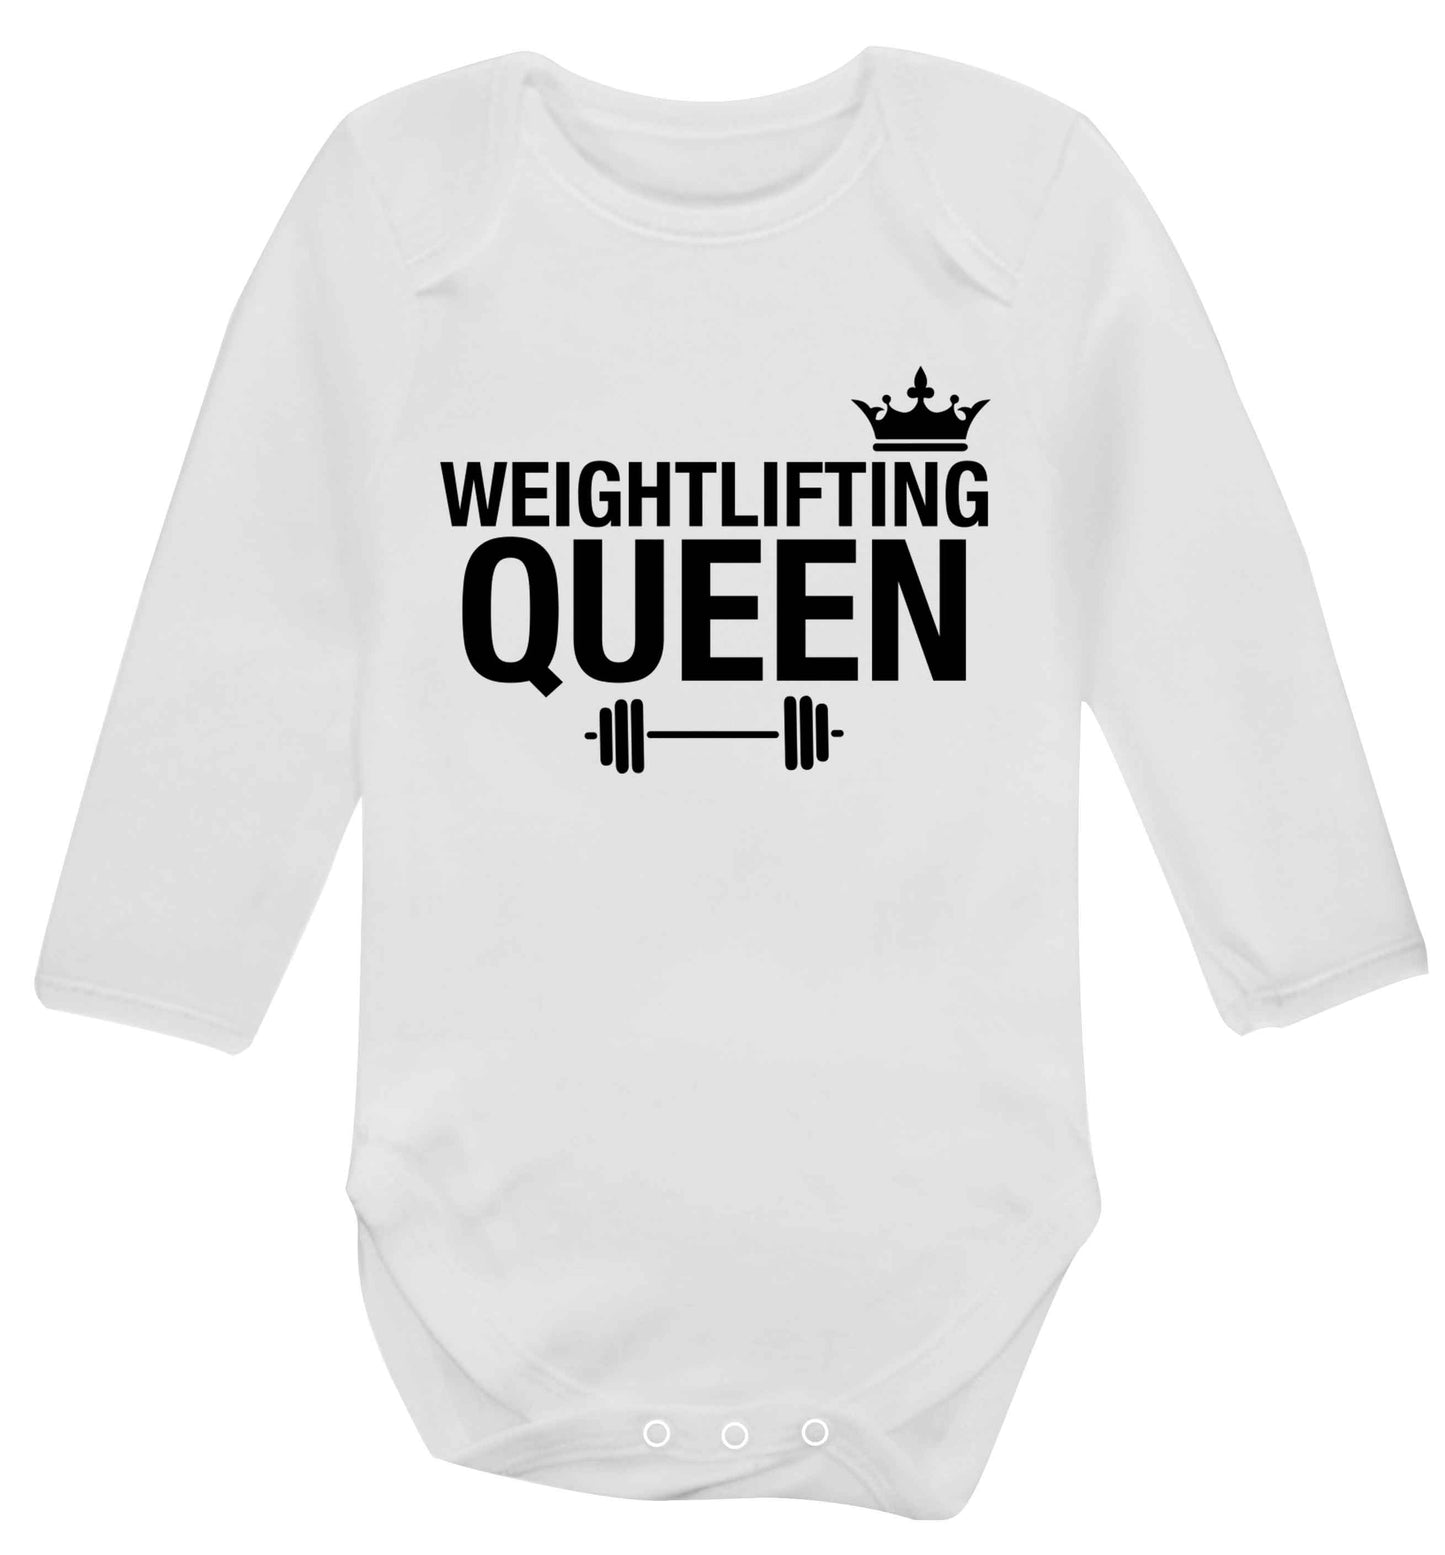 Weightlifting Queen Baby Vest long sleeved white 6-12 months